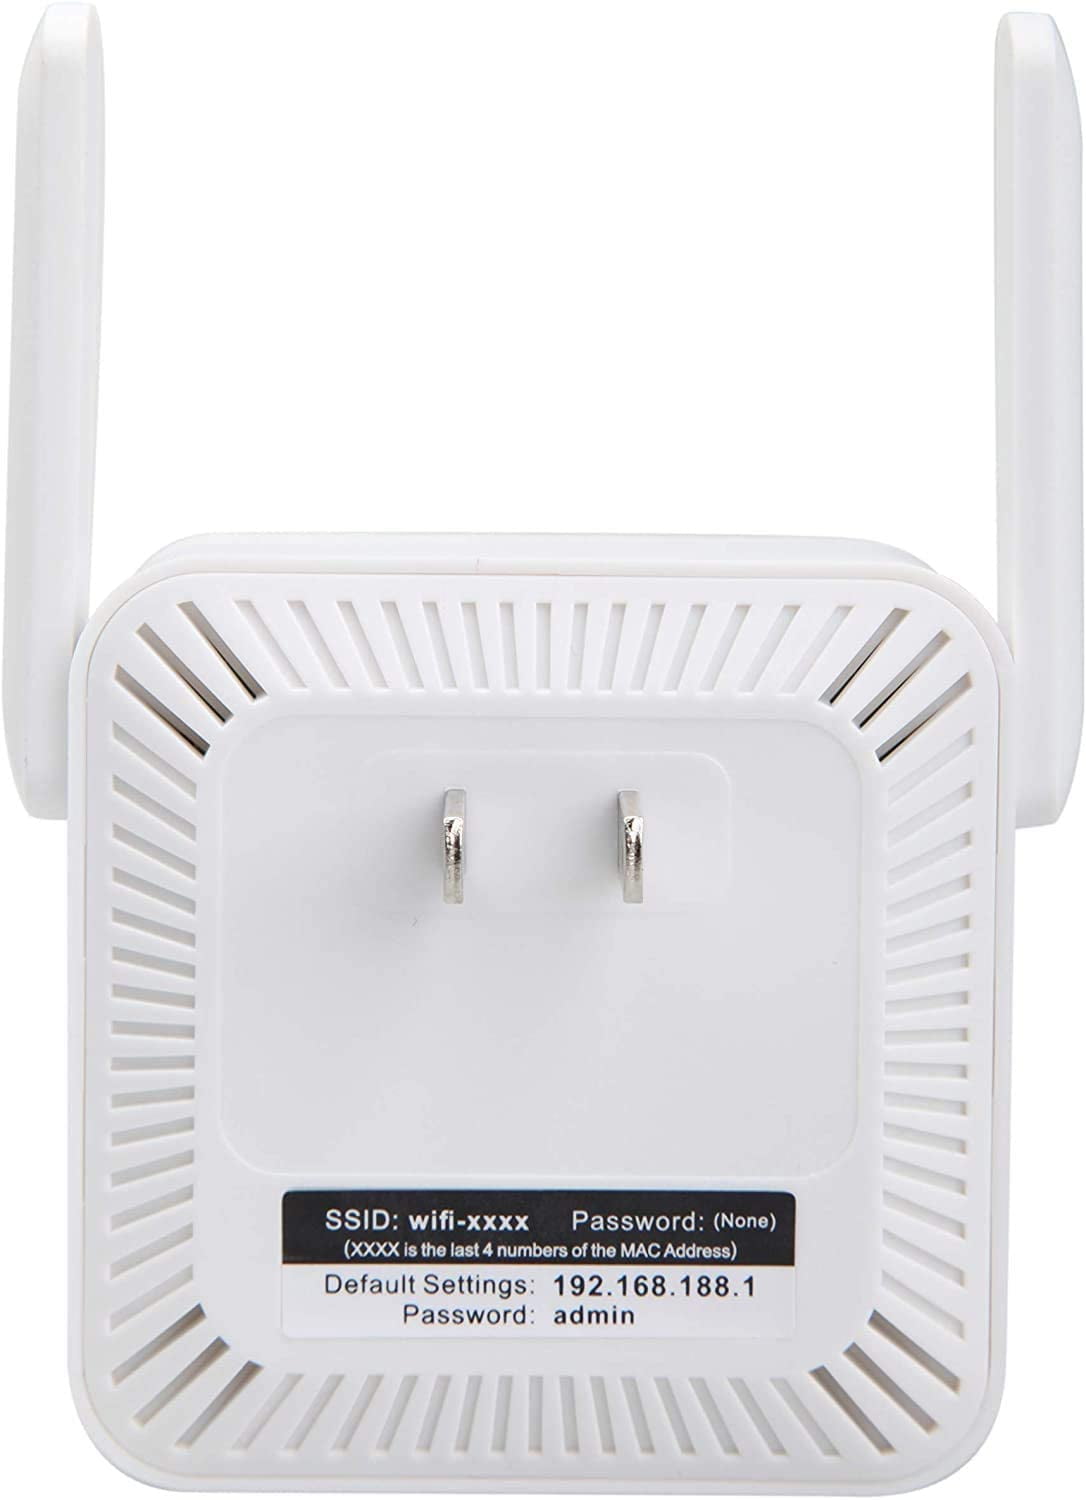 Daggry Andesbjergene Foster Extend Tec, Extend Tecc WiFi Booster, Extendtecc WiFi Booster 2022, WiFi  Range Extender 300Mbps, Wireless Signal Repeater Booster 2.4 and 5GHz Dual  Band 4 Antennas 360° Full Coverage - Walmart.com